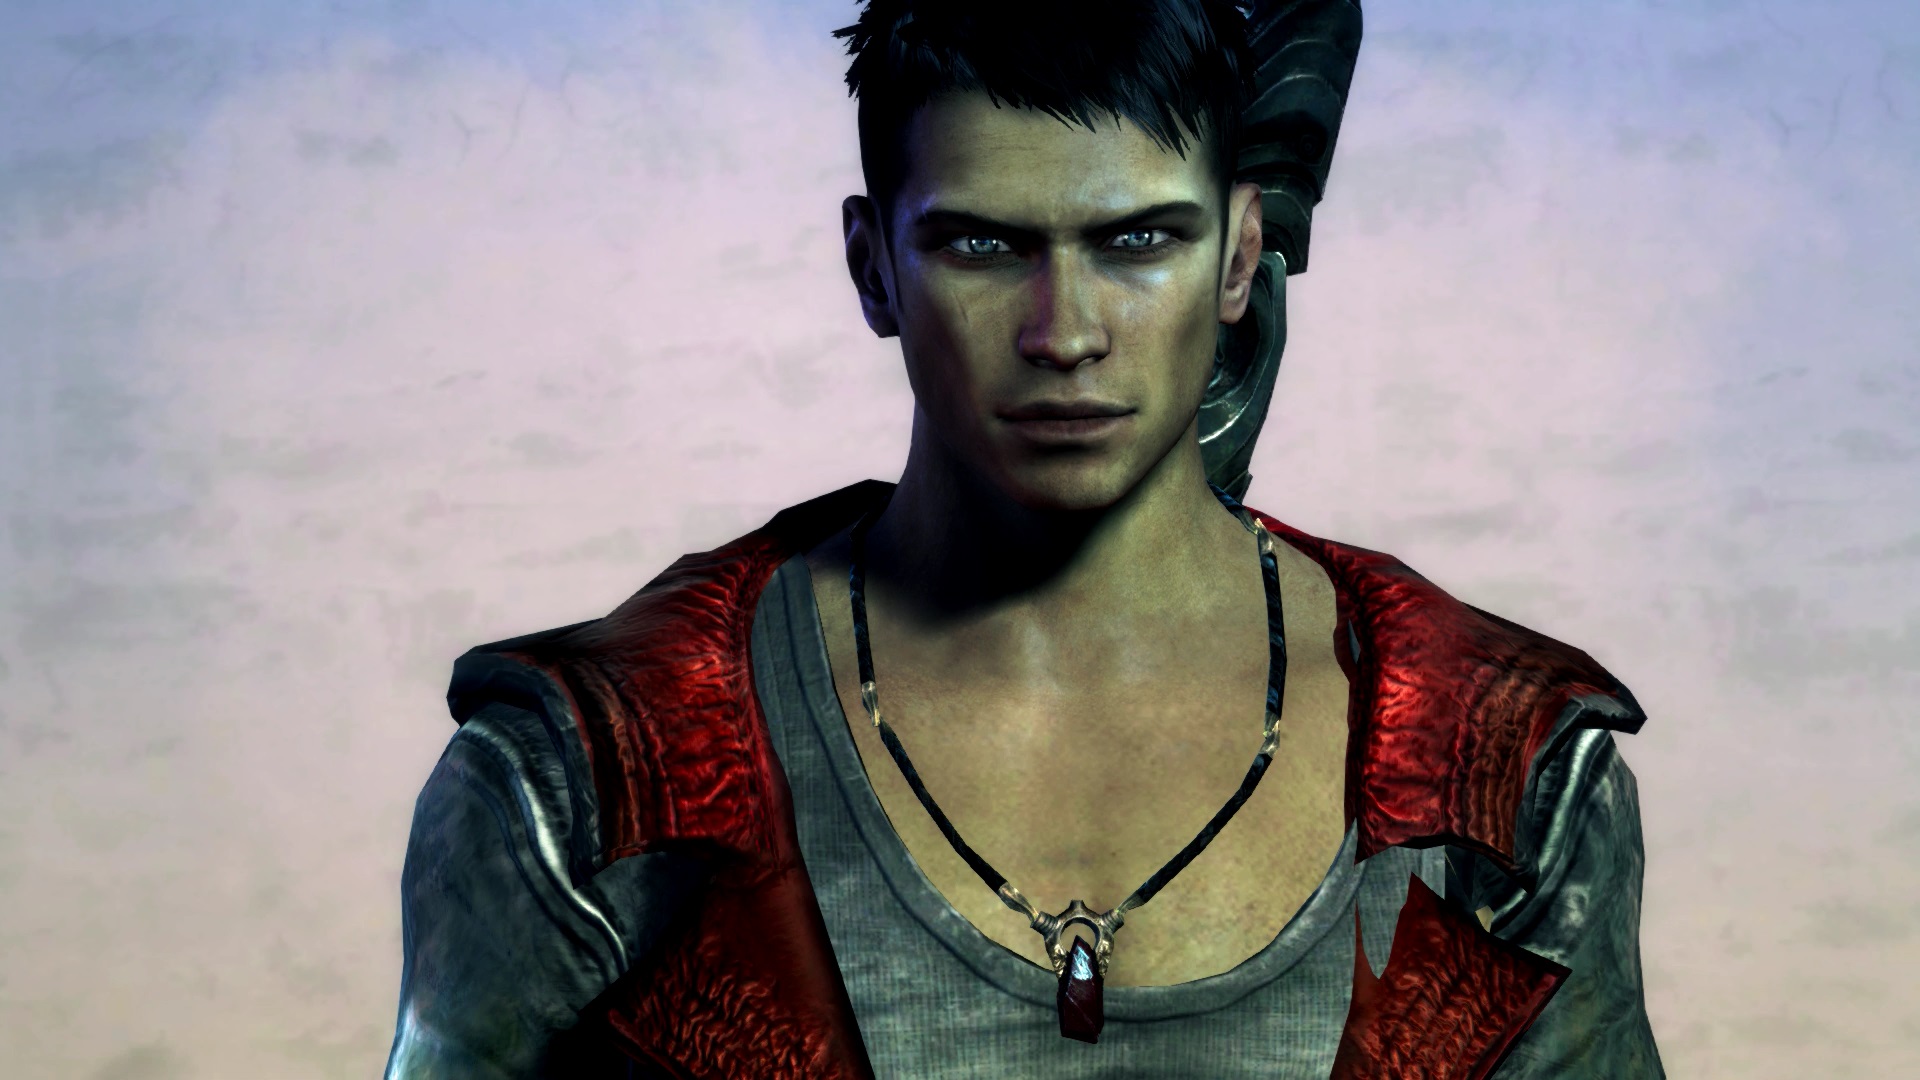 Play This: If you missed it before, DmC Devil May Cry's Definitive Edition  is worth your time